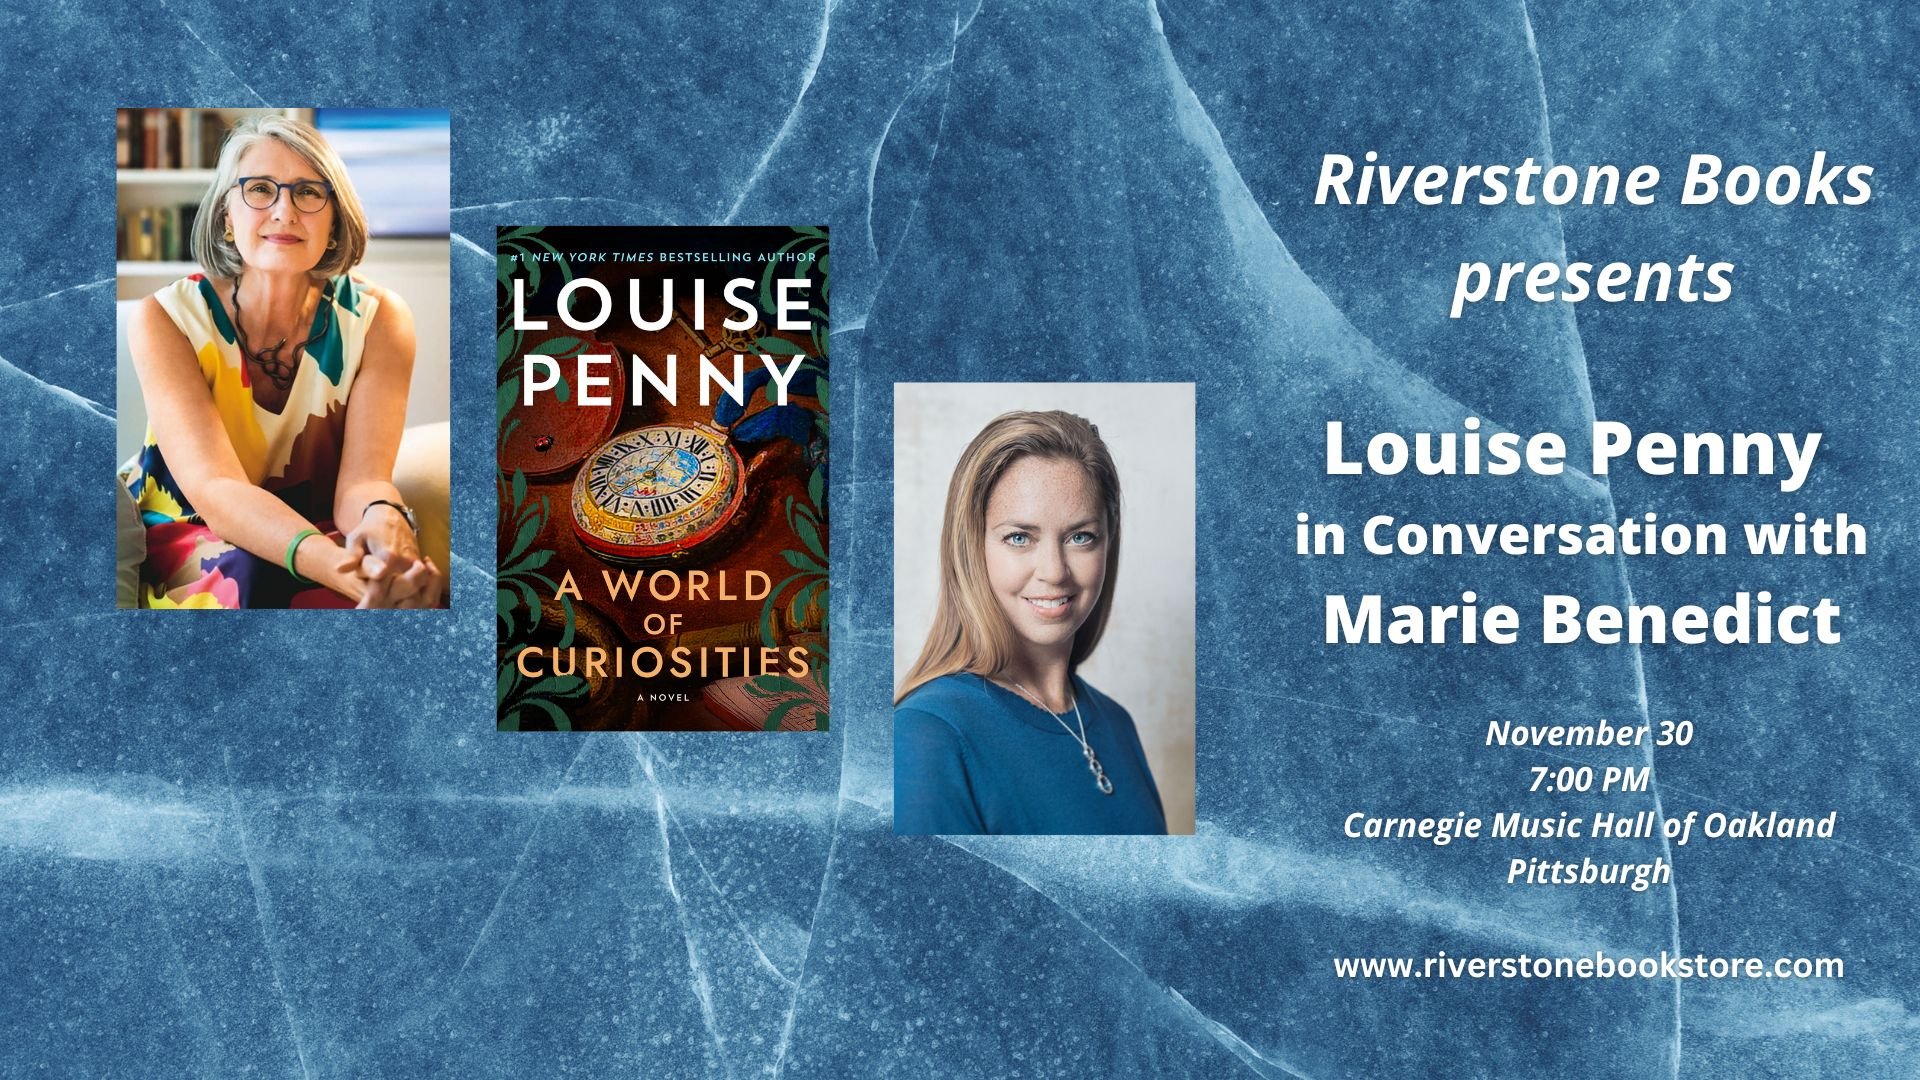 Author Louise Penny will take part in Arts & Letters Live event